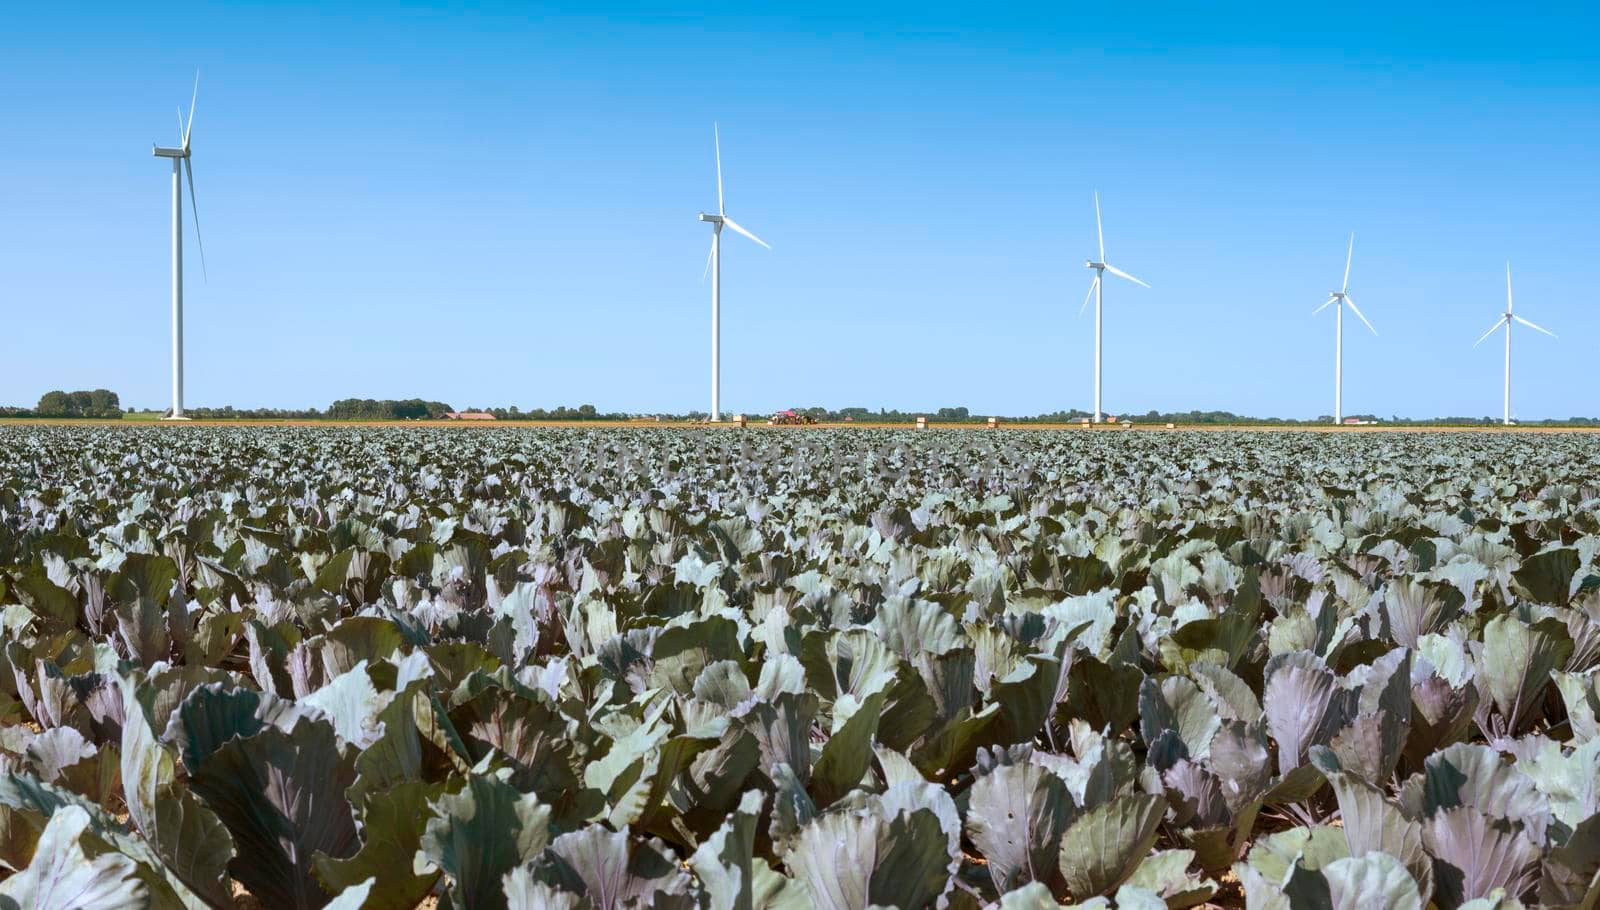 field with red cabbage and wind turbines in wieringermeer in the netherlands by ahavelaar